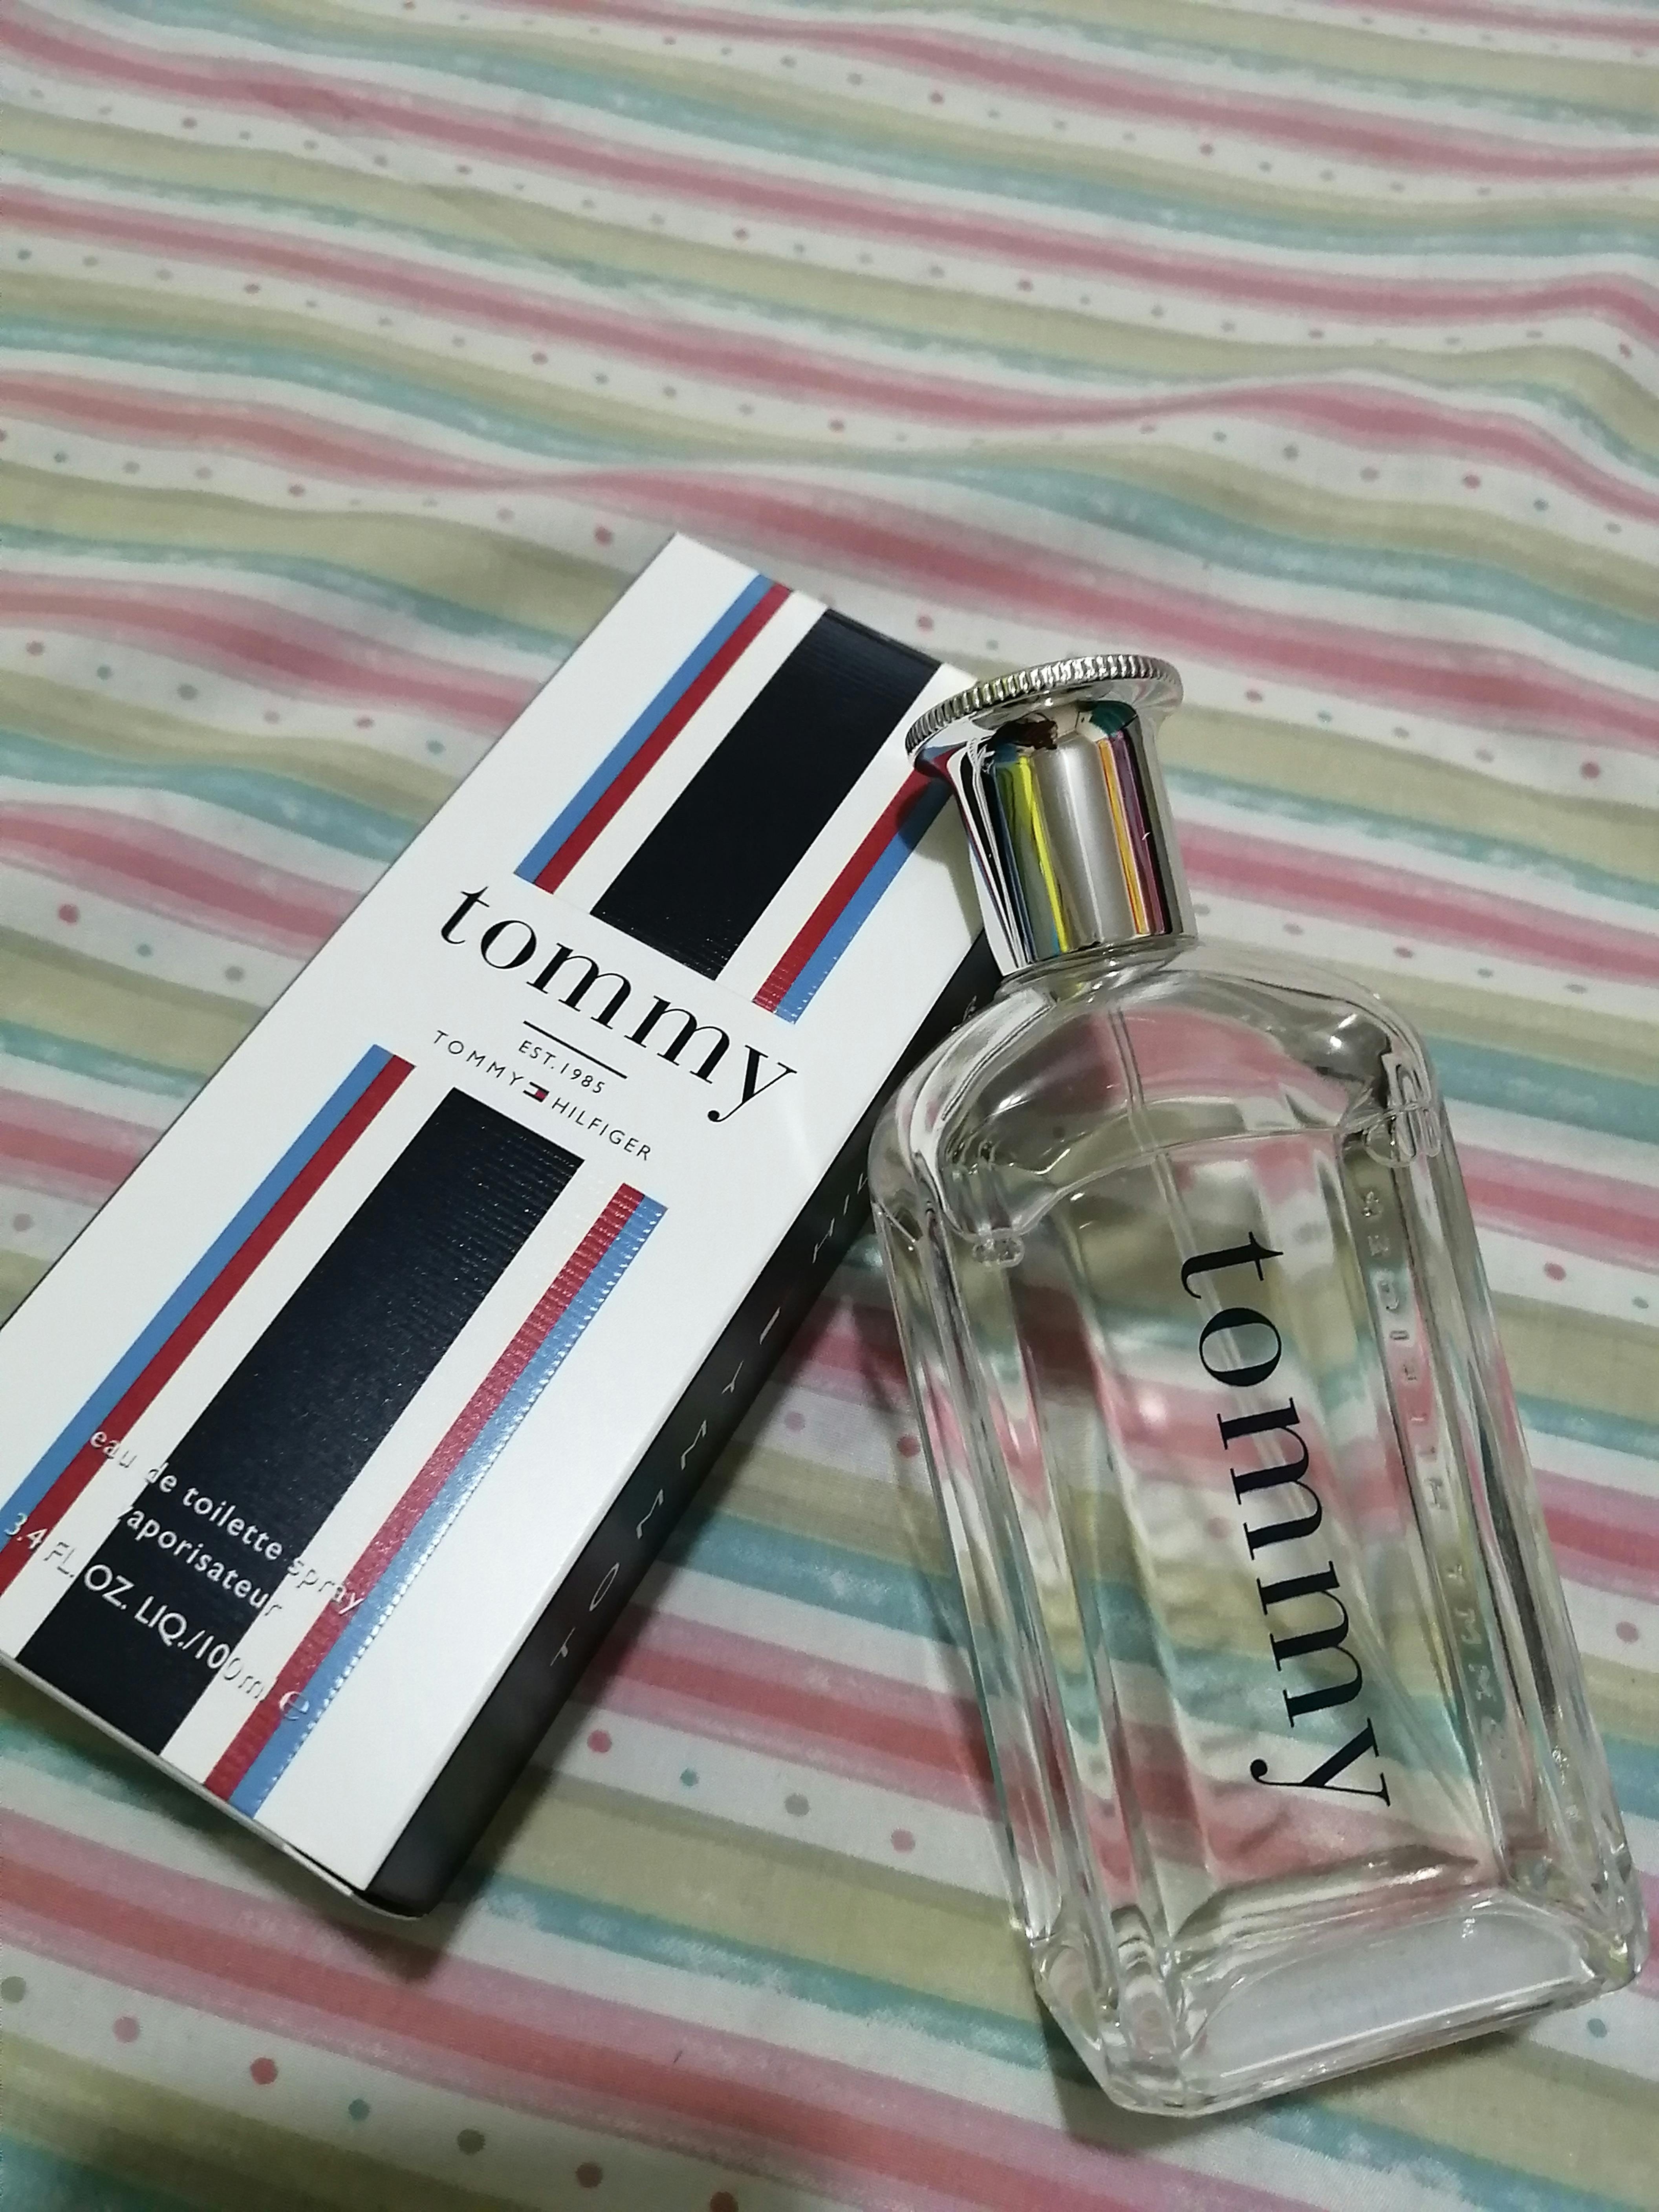 tommy hilfiger aftershave review